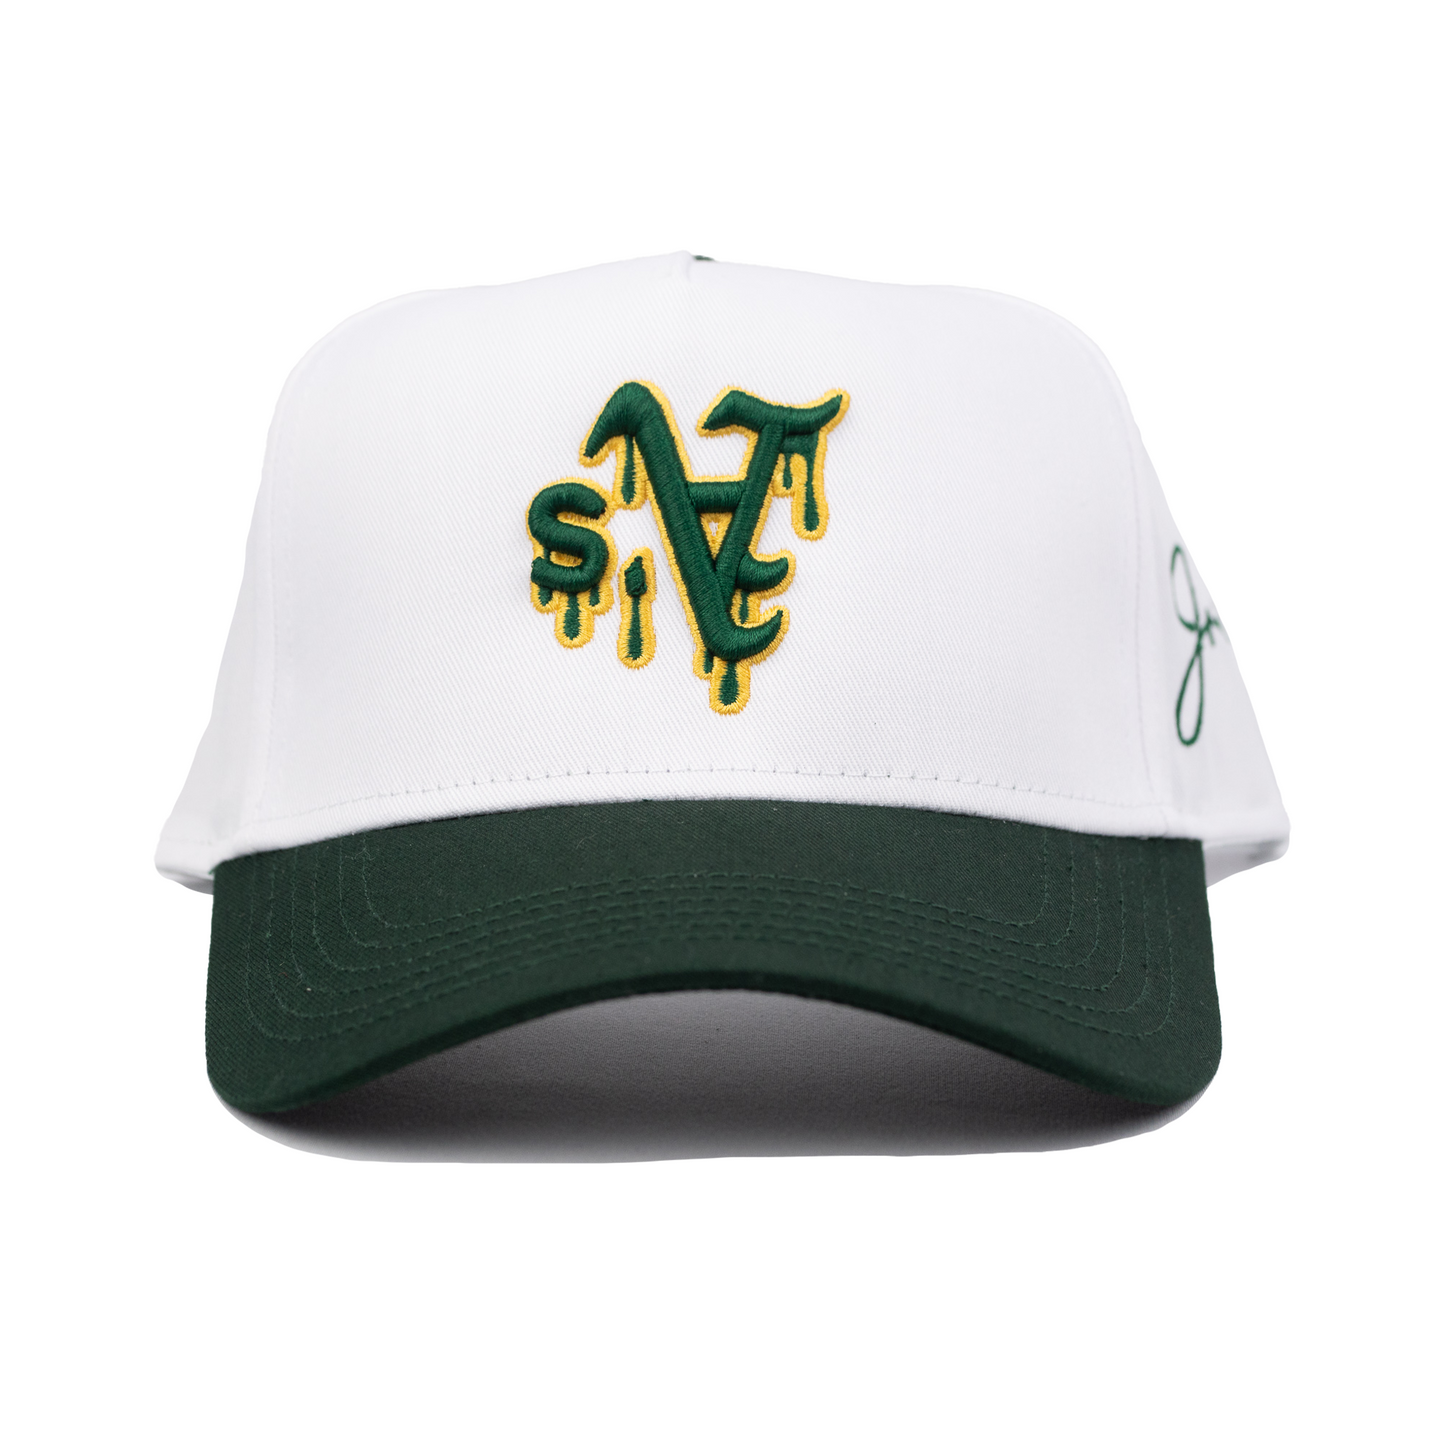 A's Dripping Snapback Hat (TWO TONE/WHITE & GREEN)